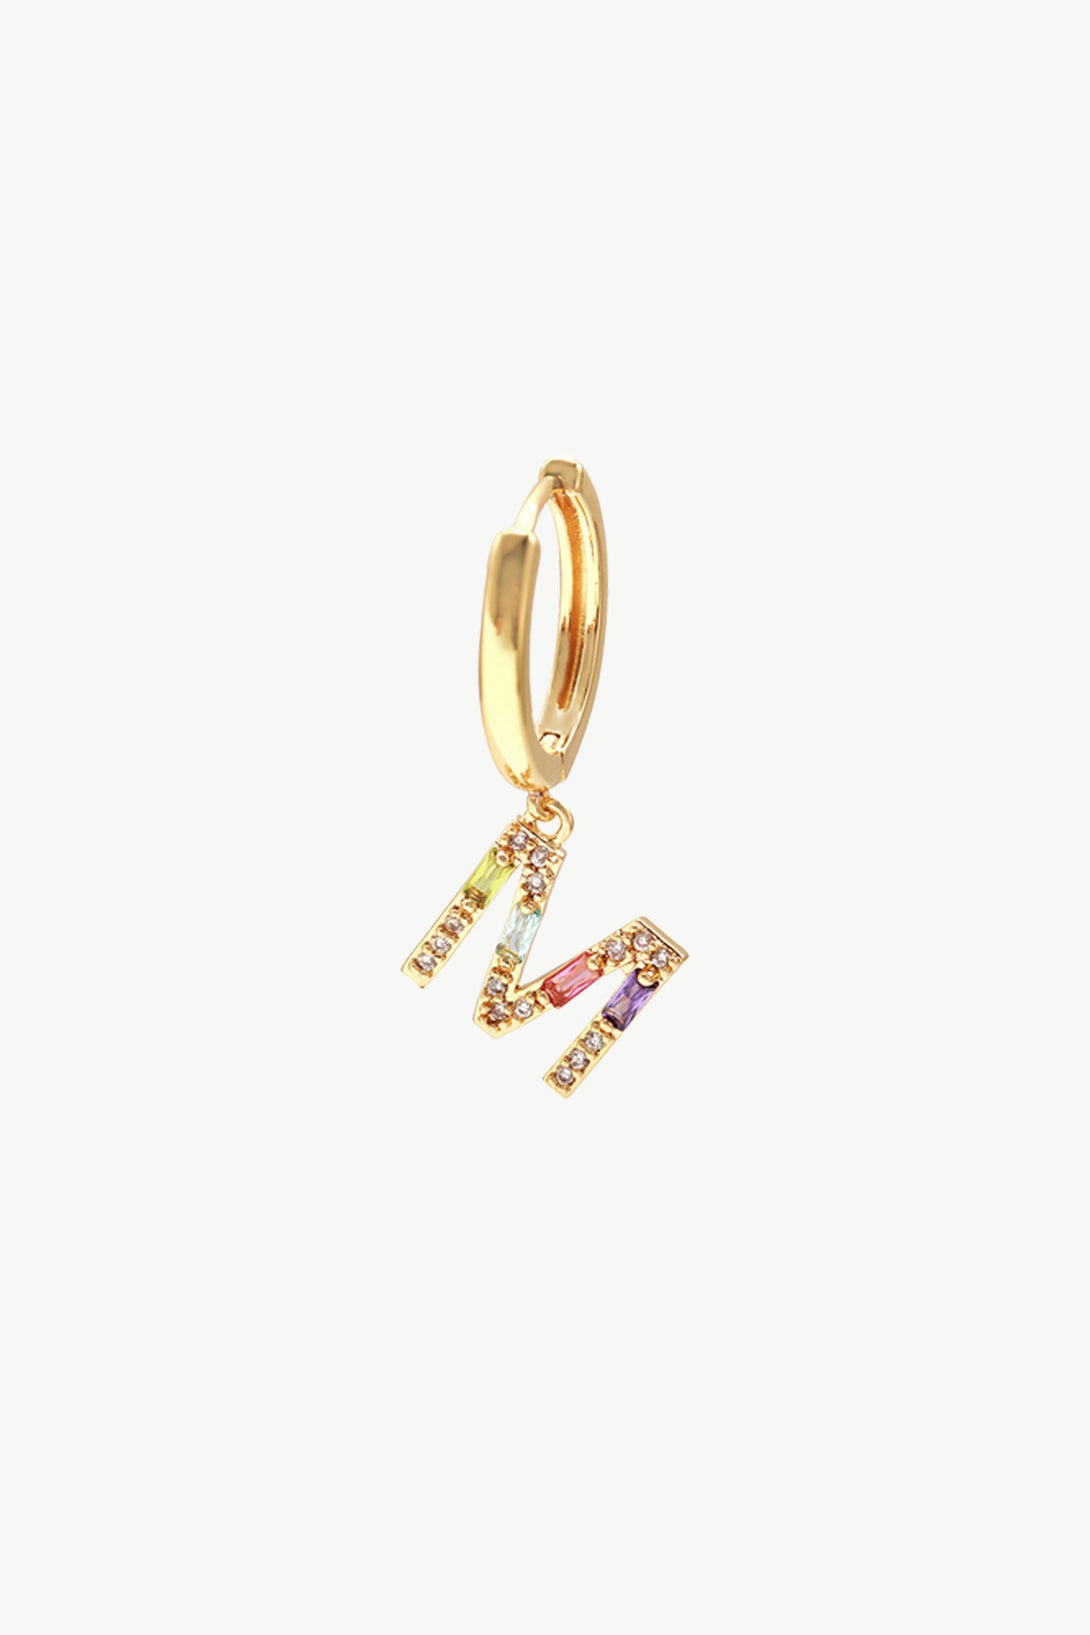 Single Gold Pavé Initial Charm Drop Huggie Hoop Earring-Letter M - Classicharms